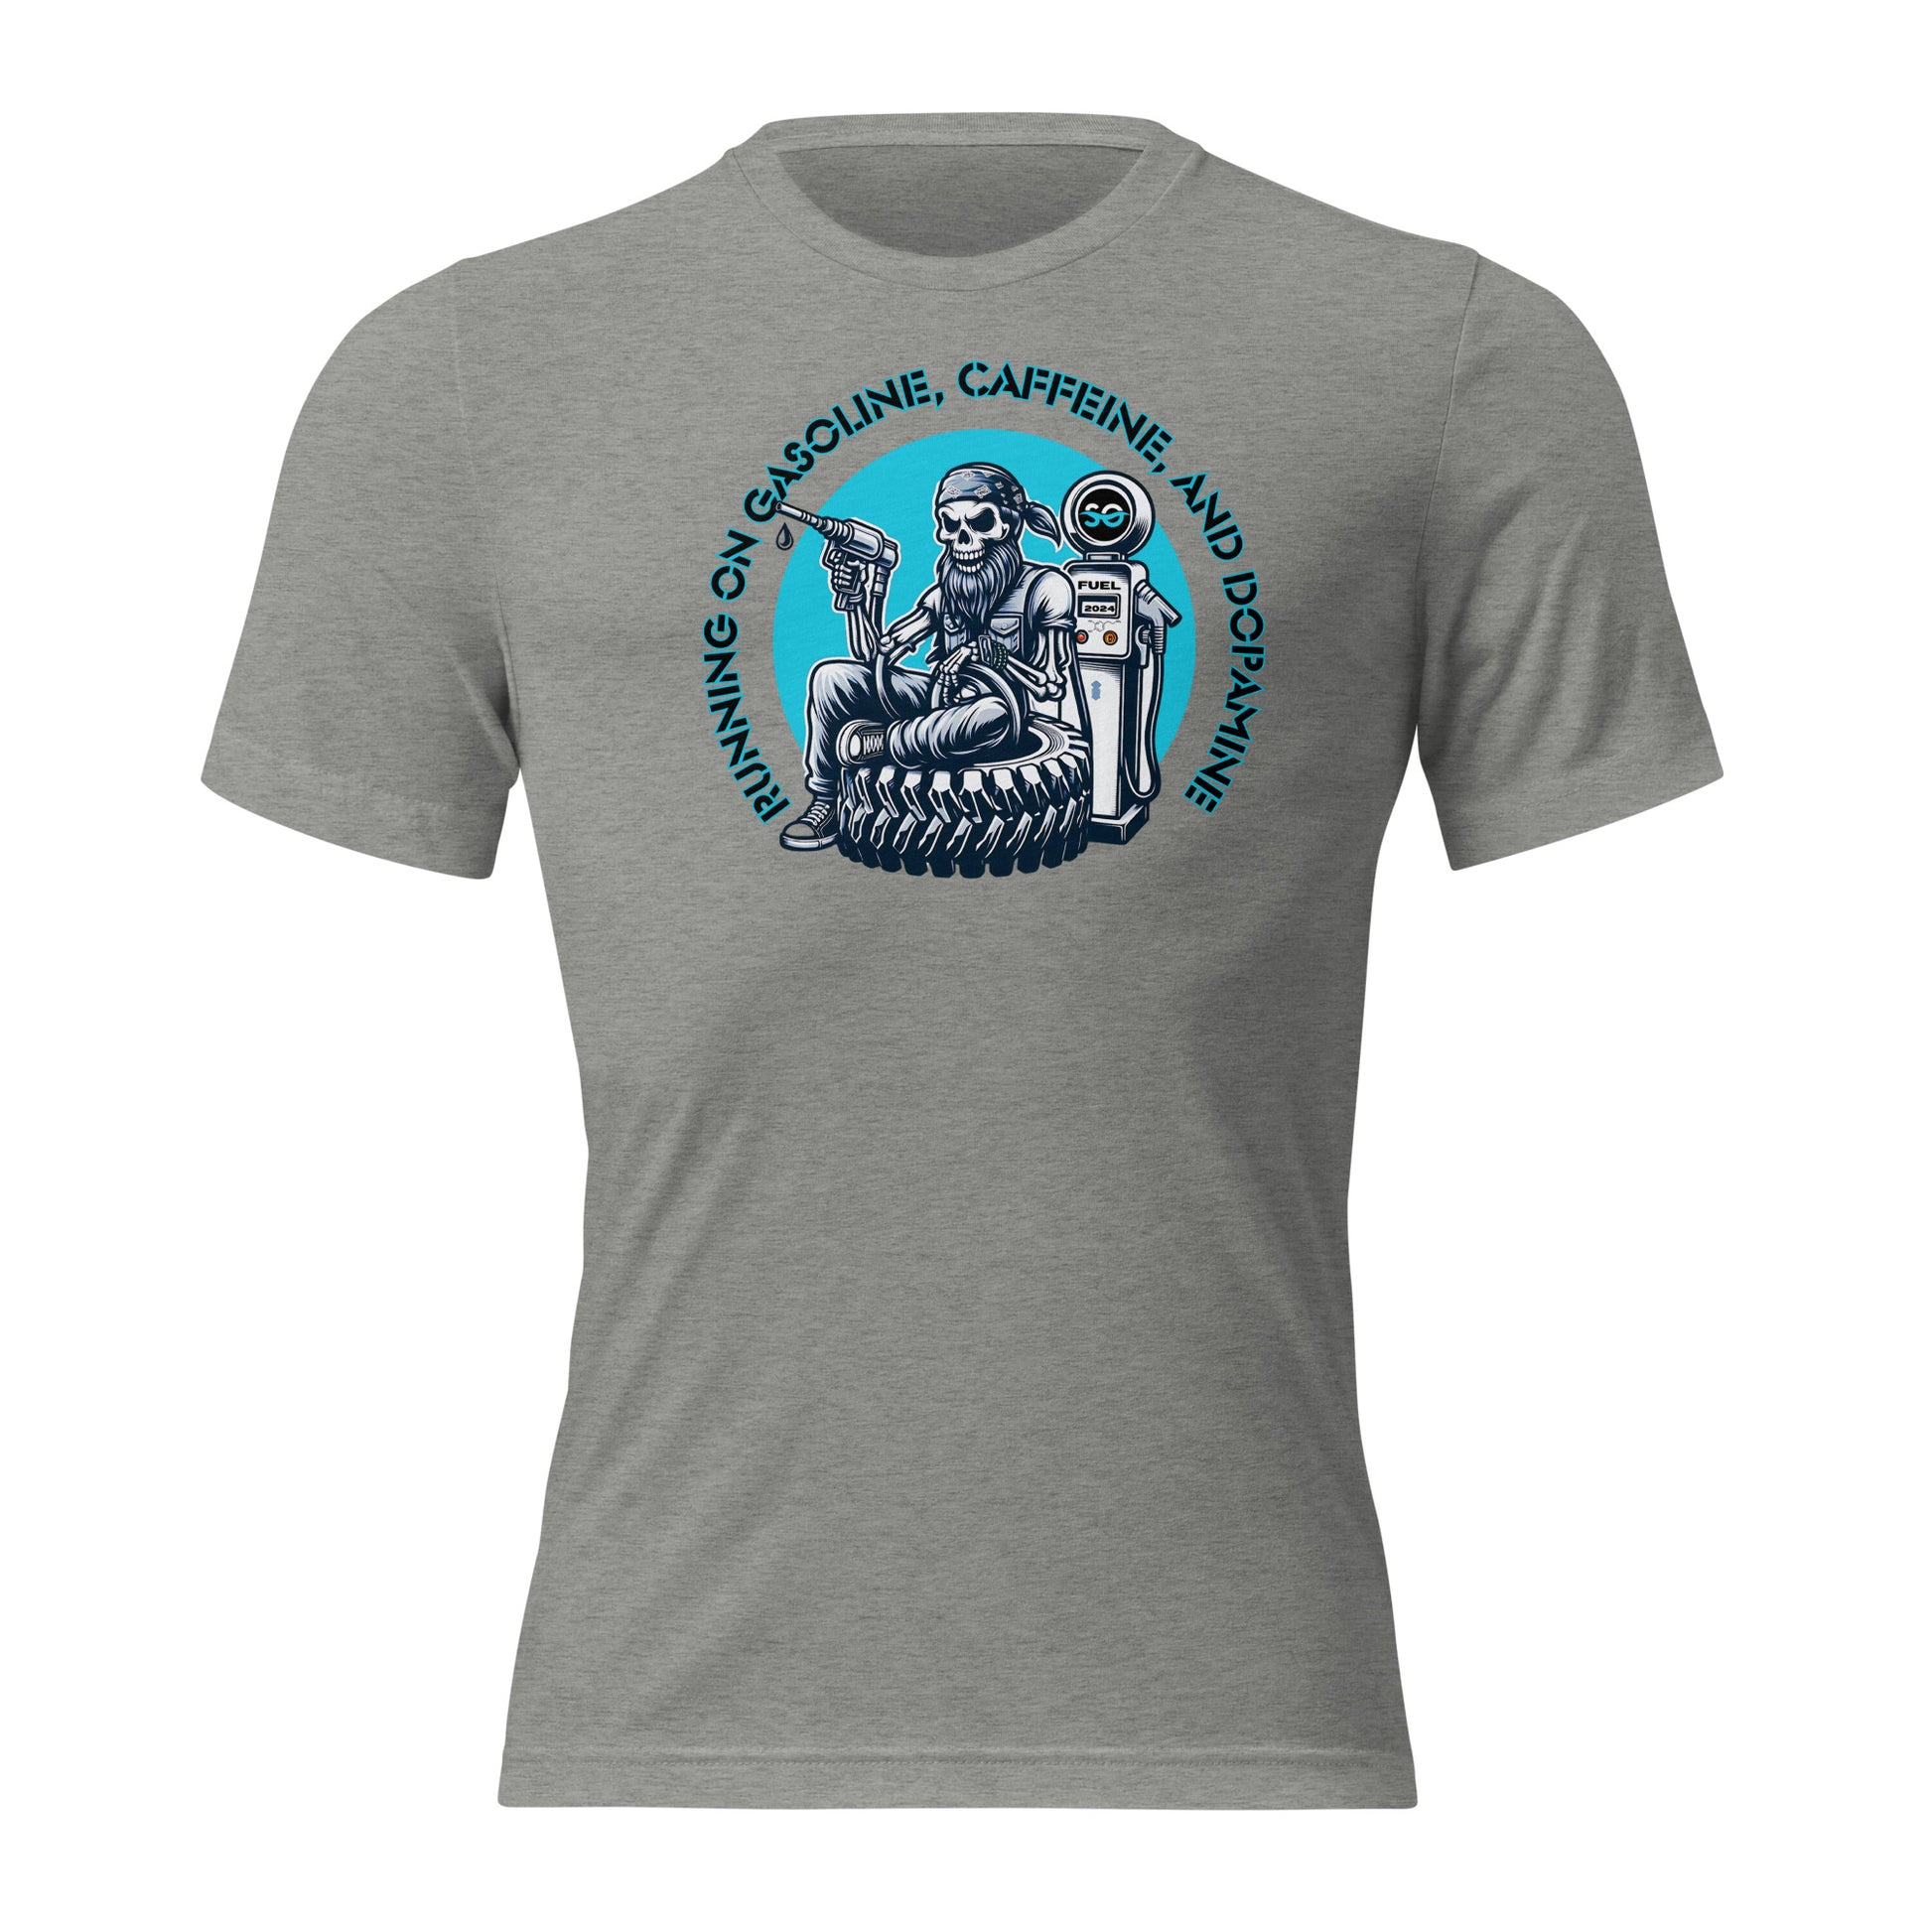 a grey t - shirt with a picture of a man on a motorcycle